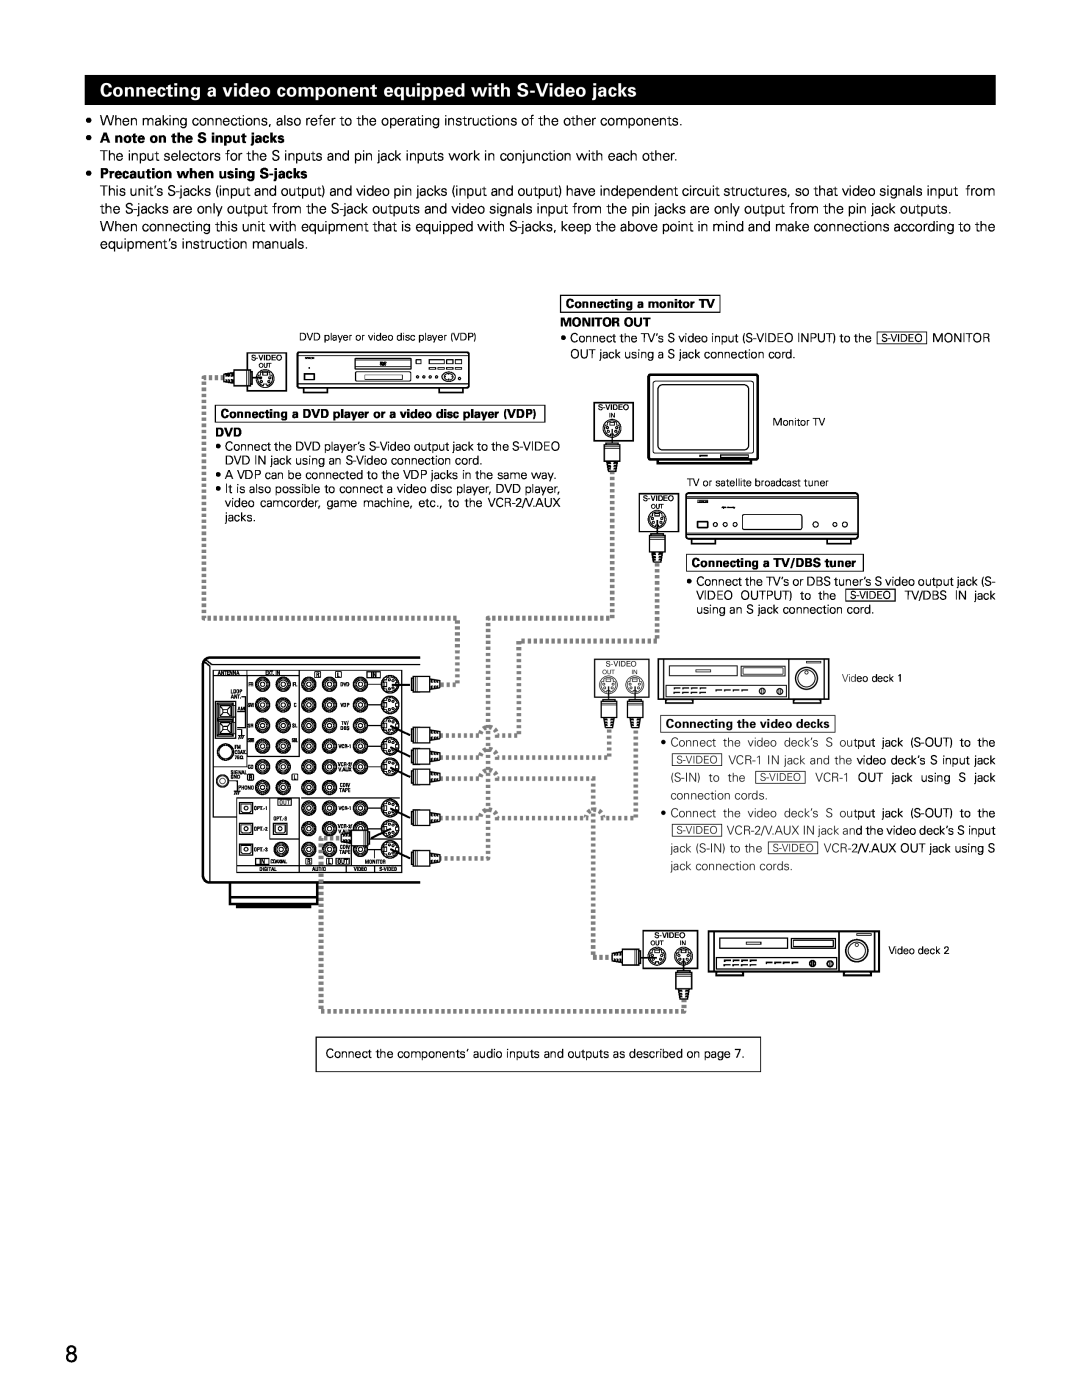 Denon AVR-3802 manual A note on the S input jacks, Precaution when using S-jacks, Connecting a monitor TV, Monitor Out 